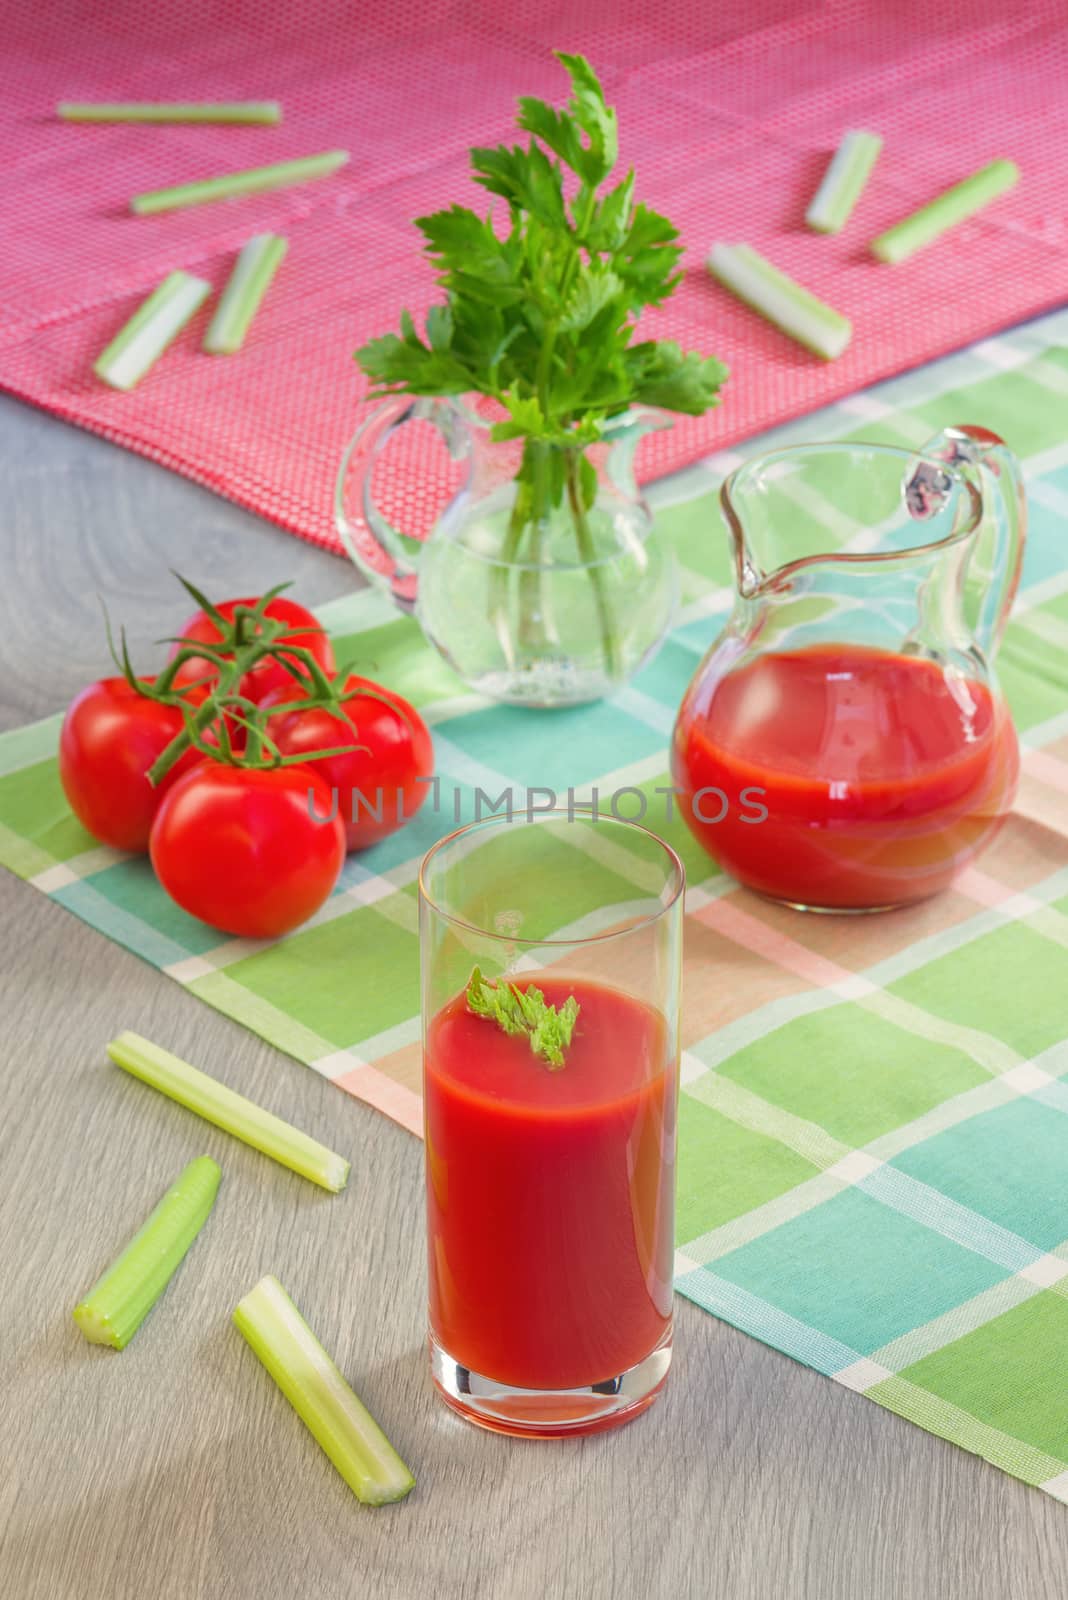 Glass with tomato juice, tomatoes, stalks and leaves of a celery on table by fotooxotnik